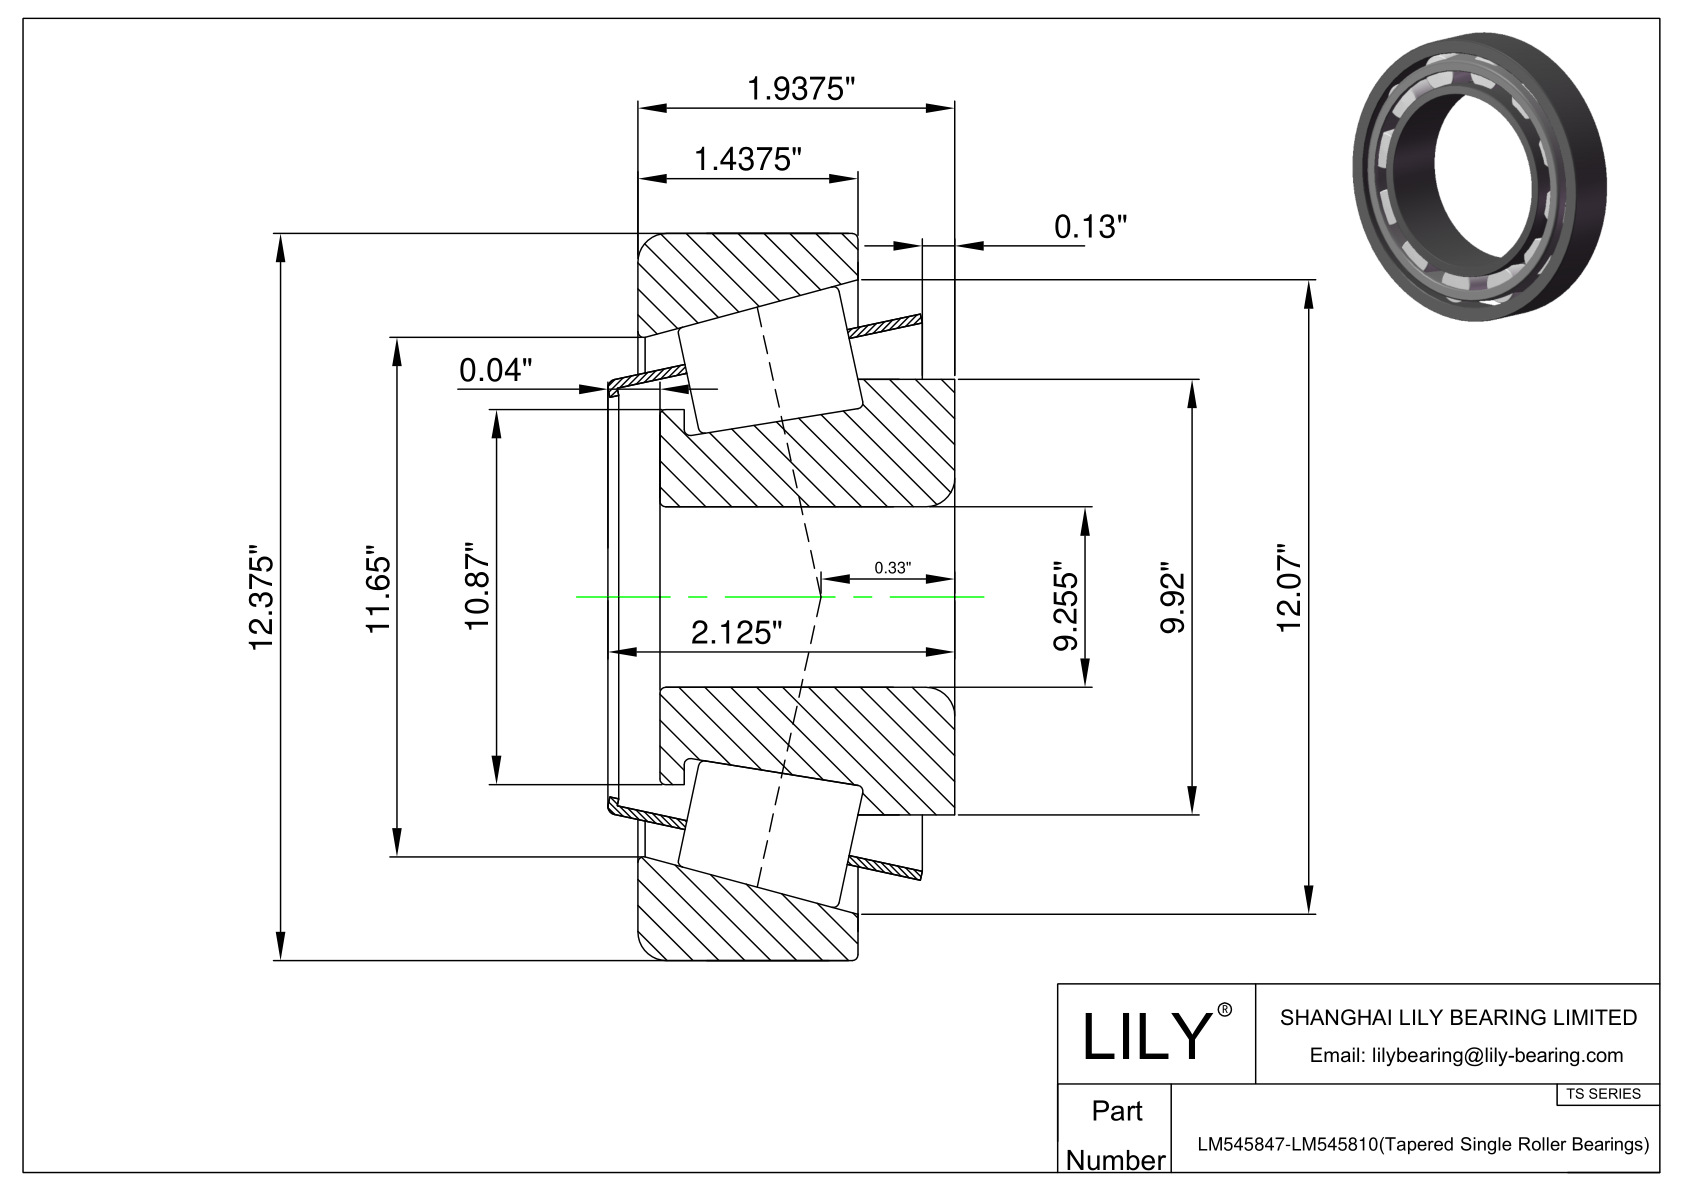 LM545847-LM545810 TS (Tapered Single Roller Bearings) (Imperial) cad drawing